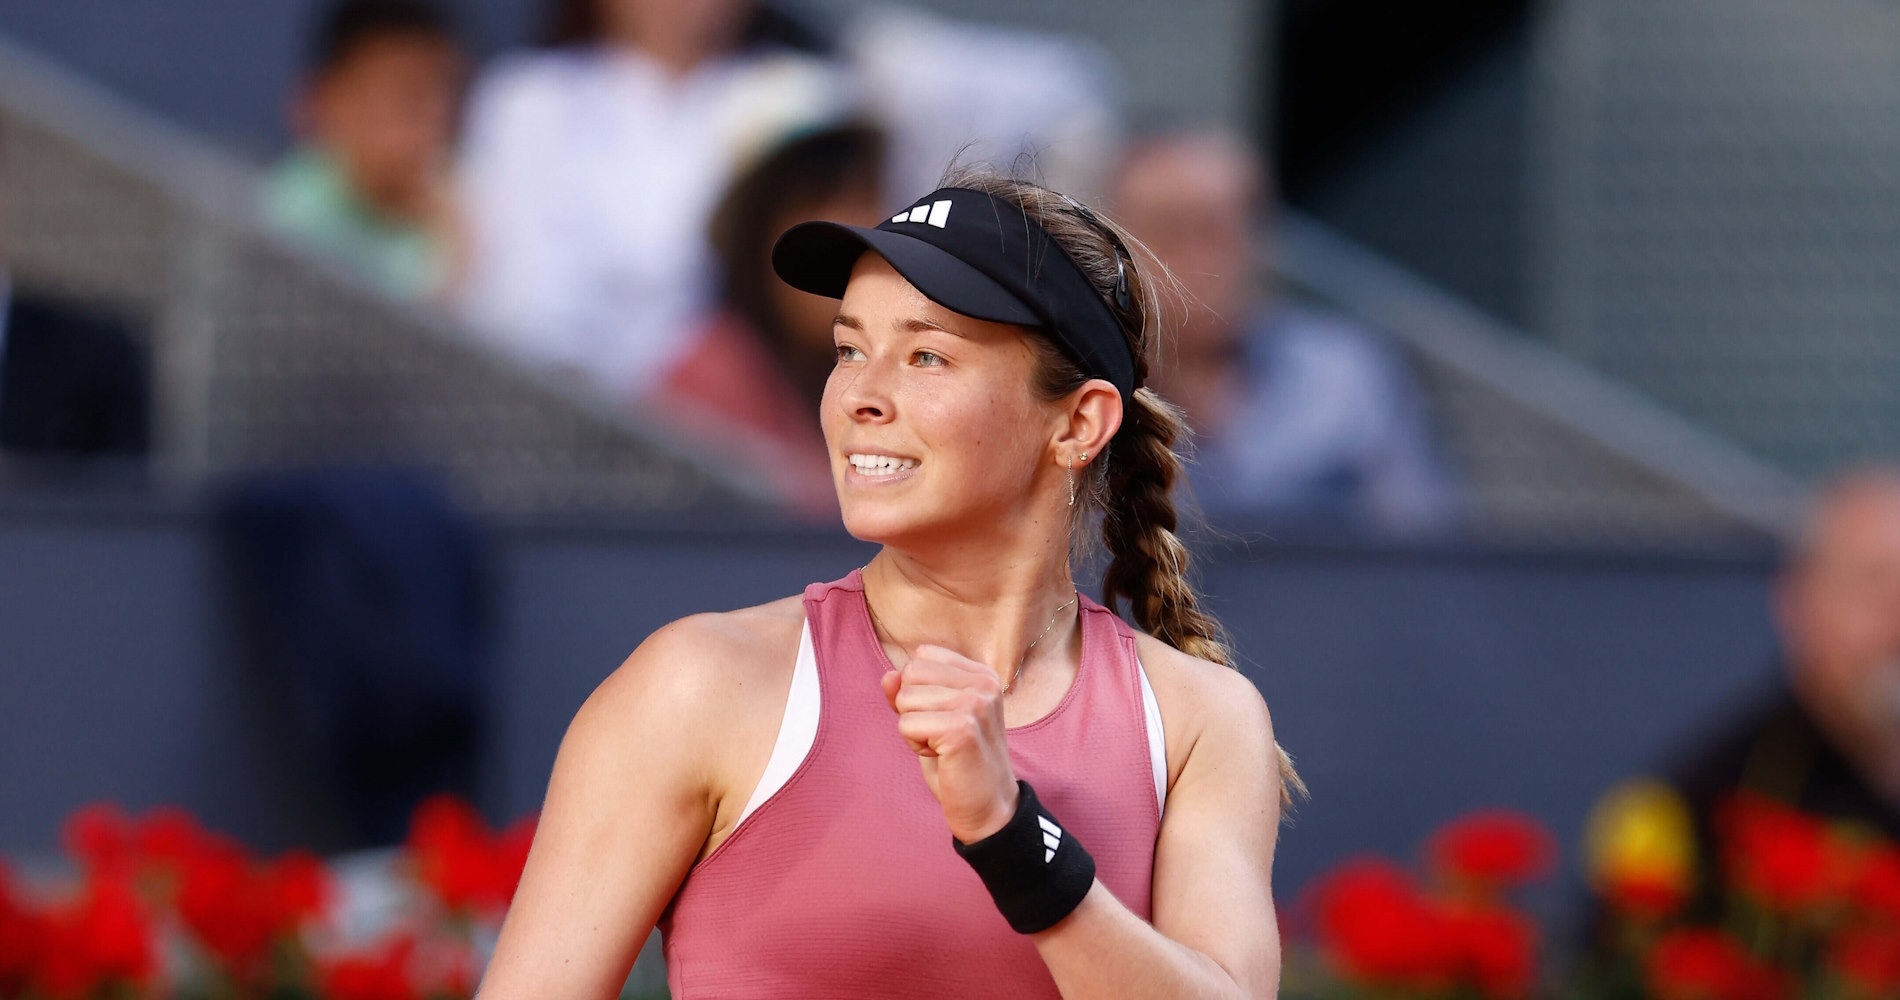 Roland-Garros: Volynets sees off Krunic to book spot in second round